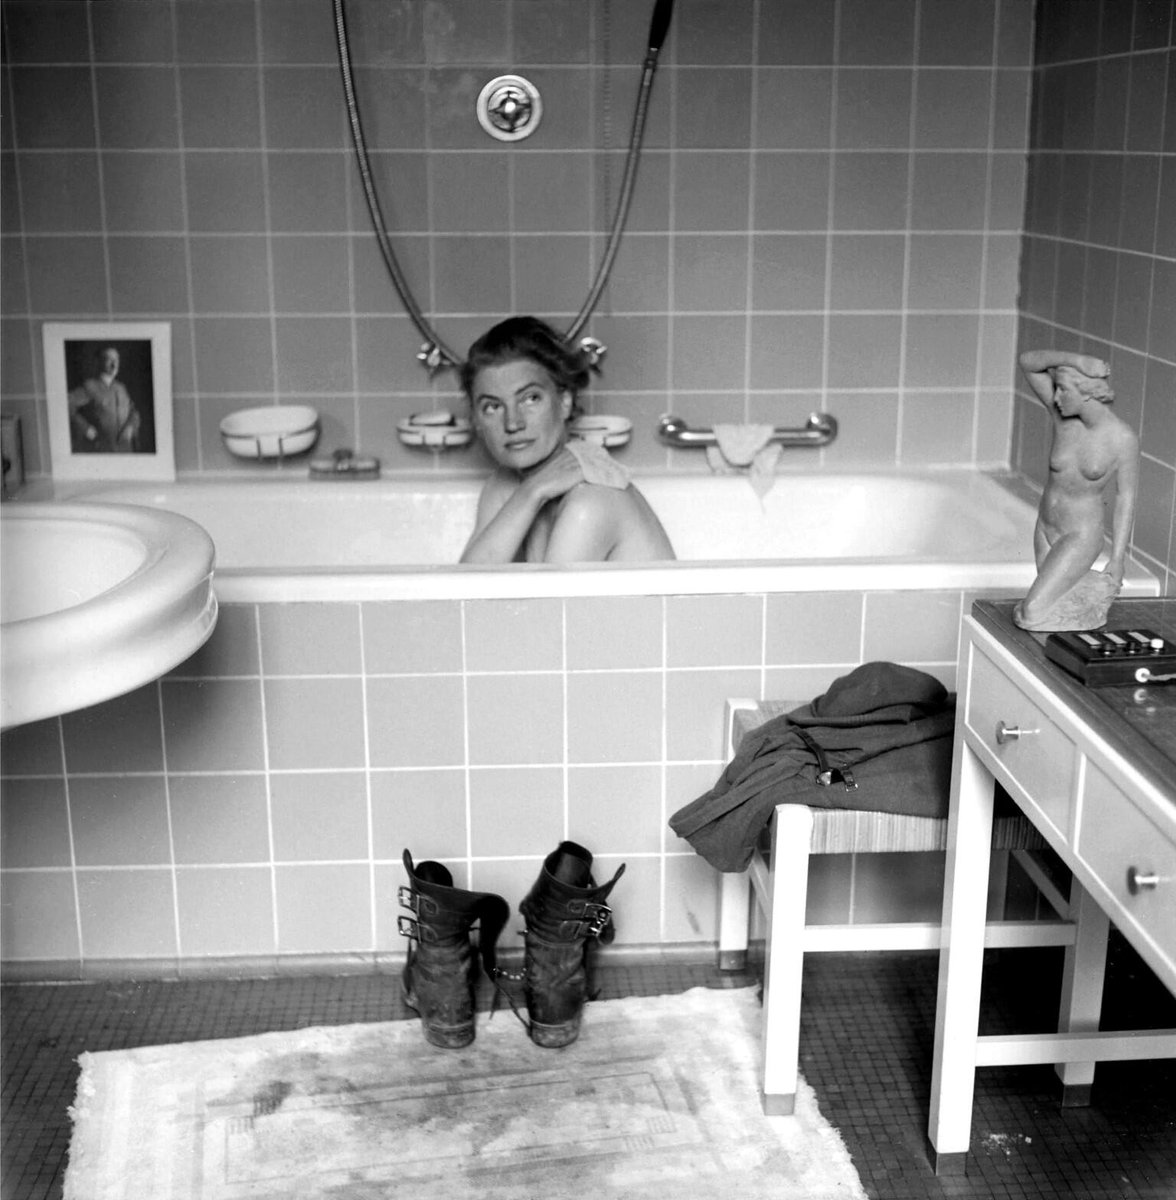 Photographer Lee Miller poses in Hitler's Munich bathtub as Allies are on verge of Victory in Europe, this month 1945:      #Getty